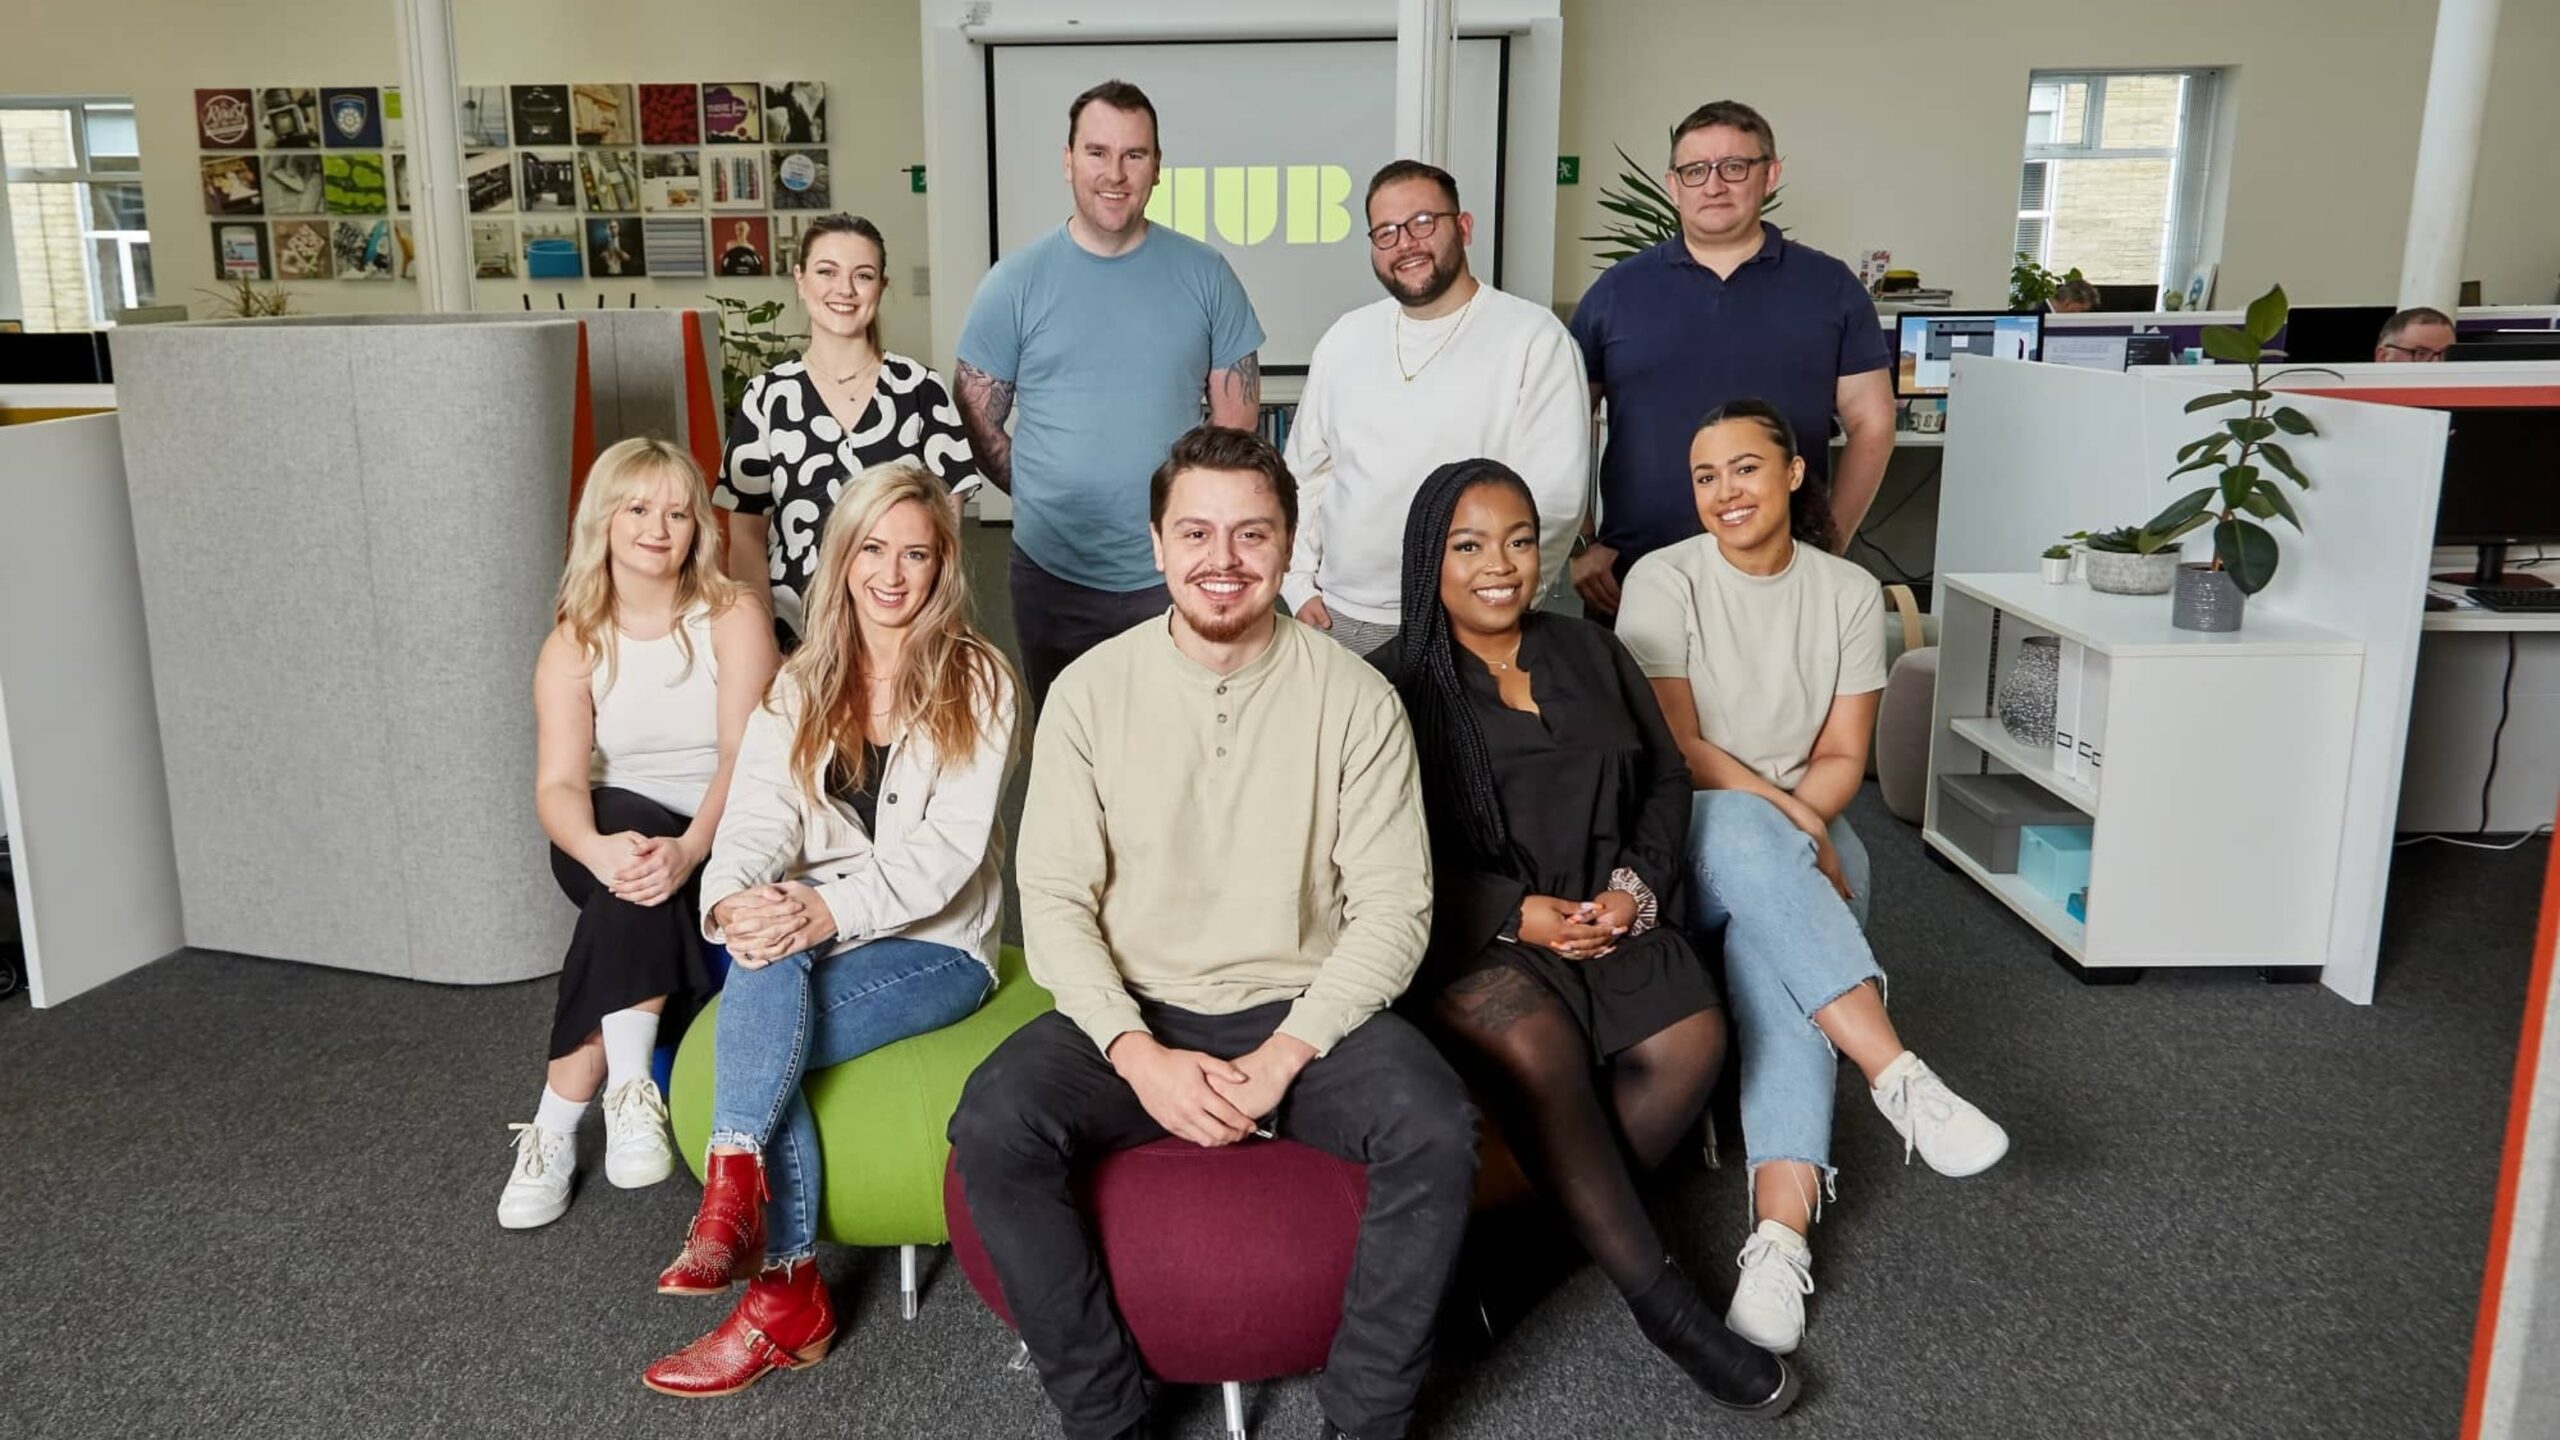 Welcoming 11 new faces to the HUB team